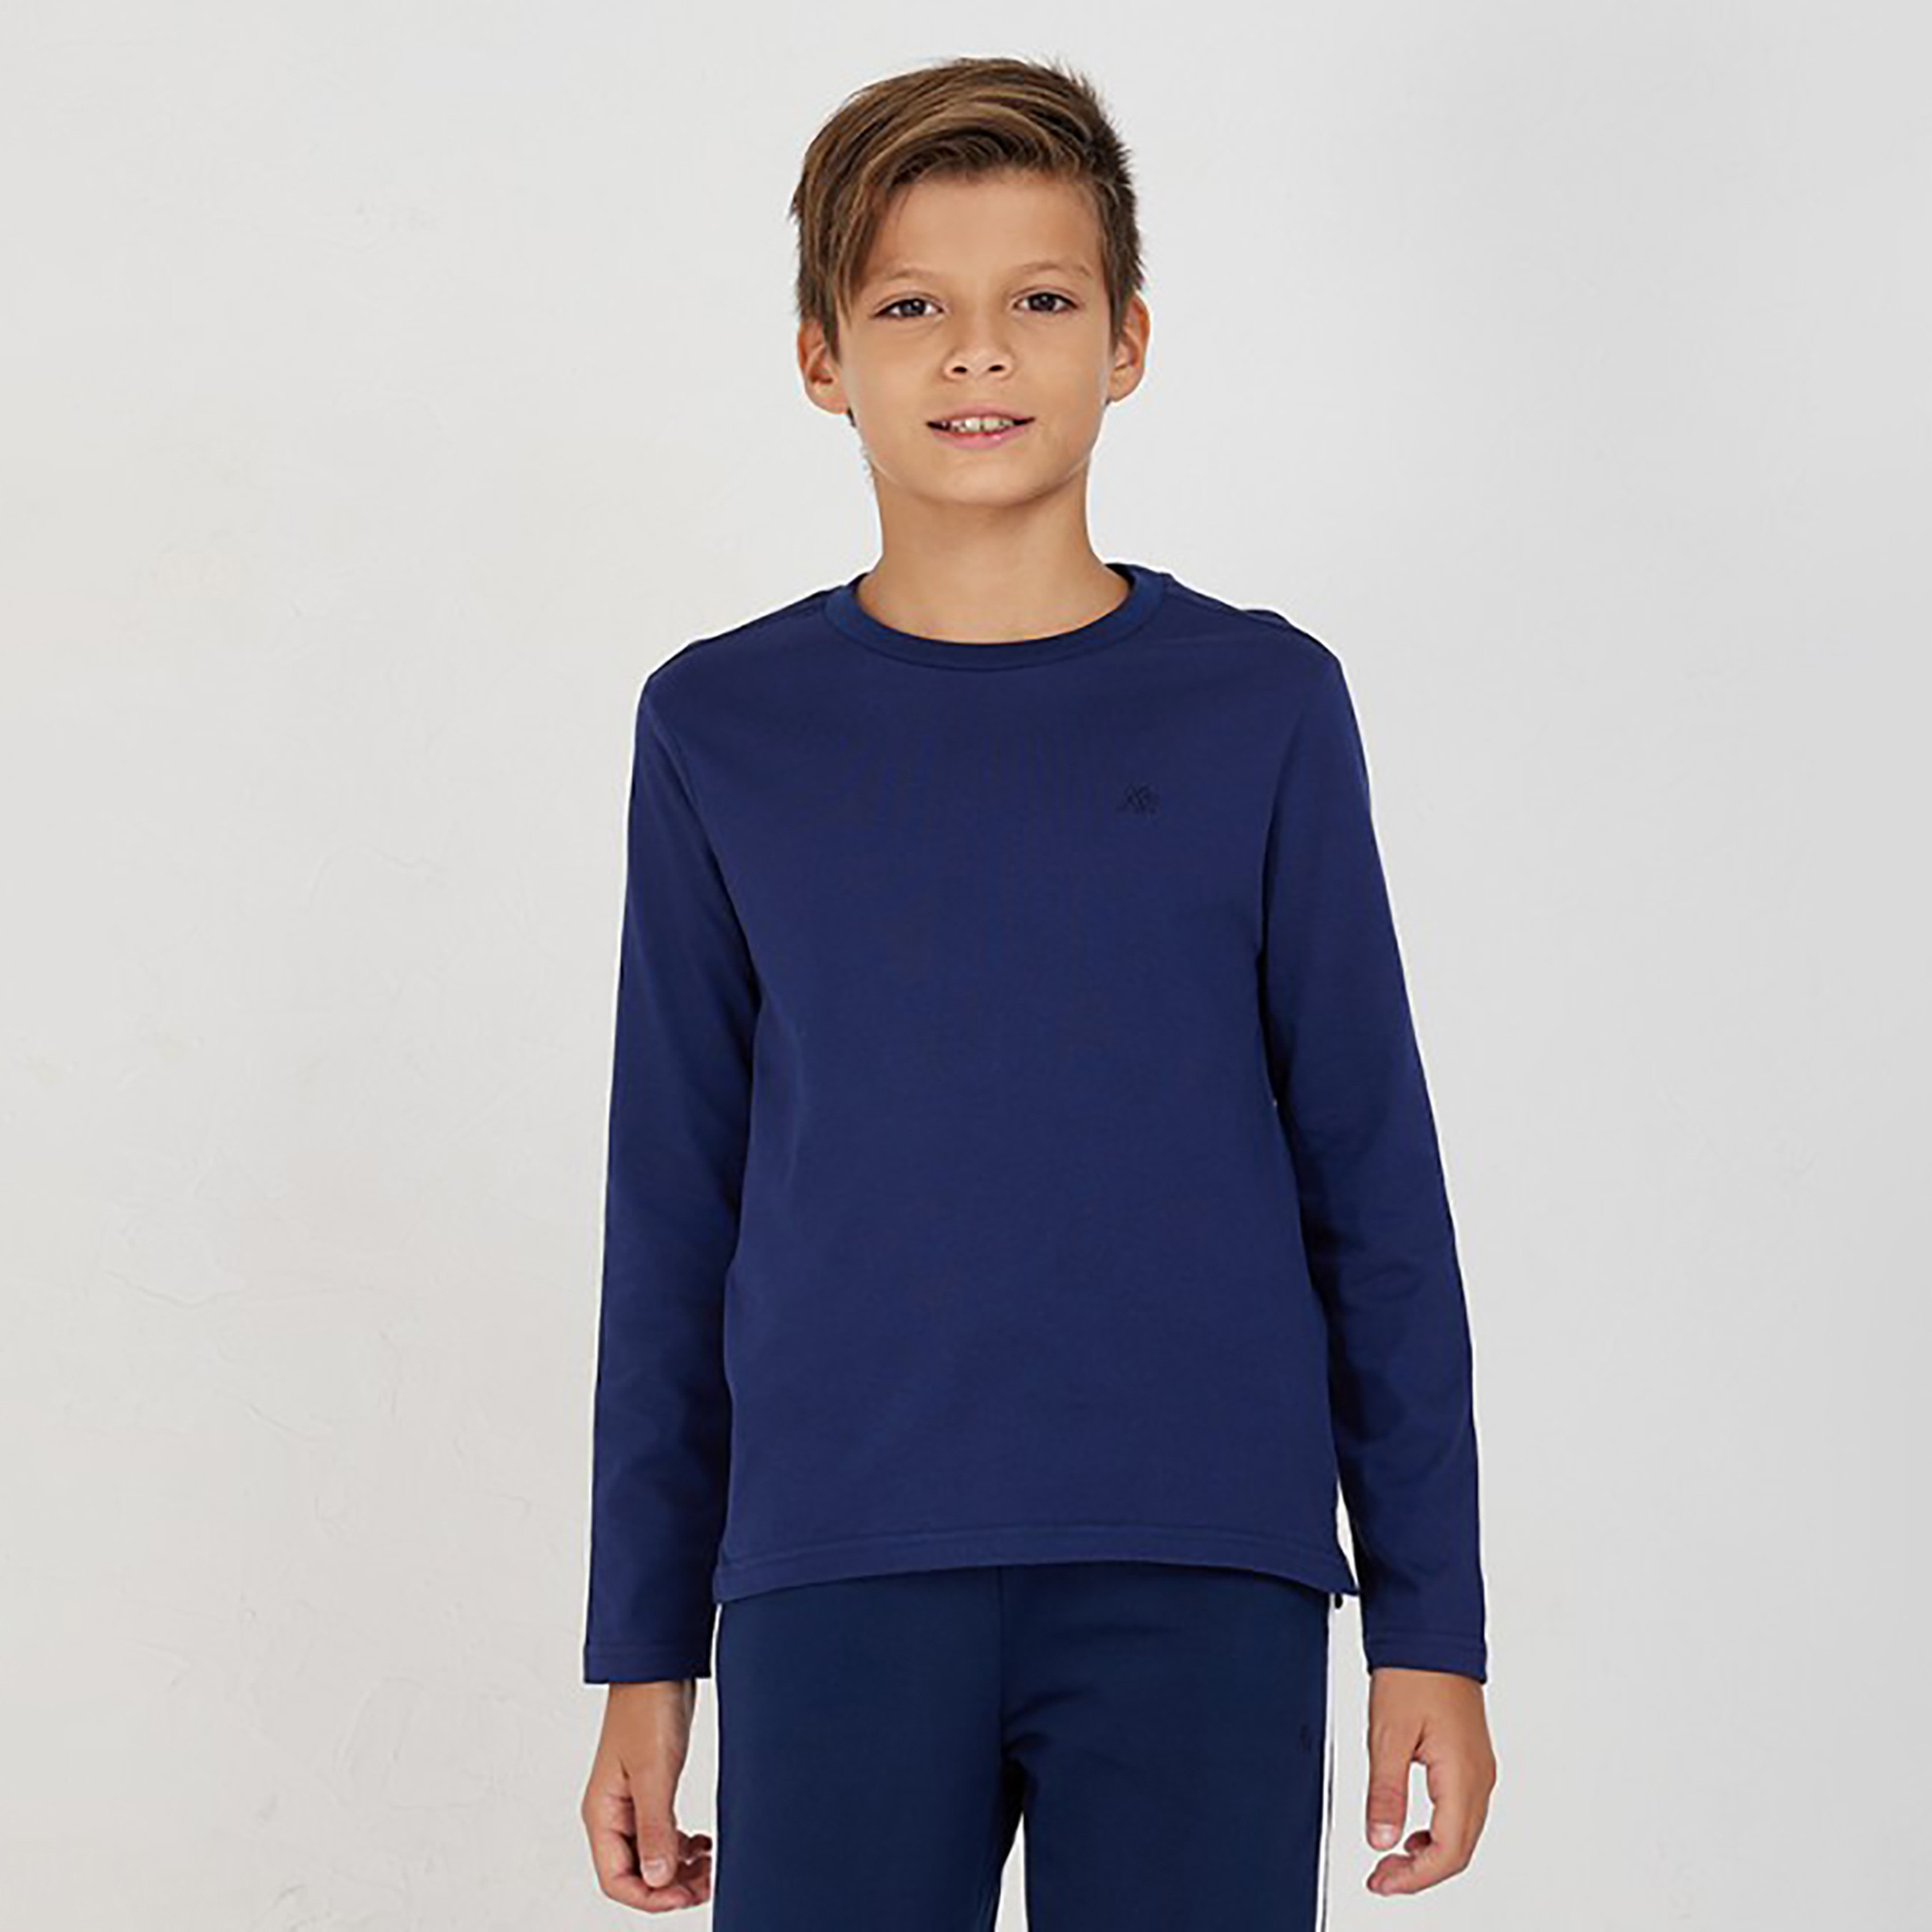 Buy Aeropostale Long Sleeve T-Shirt with A87 Branding